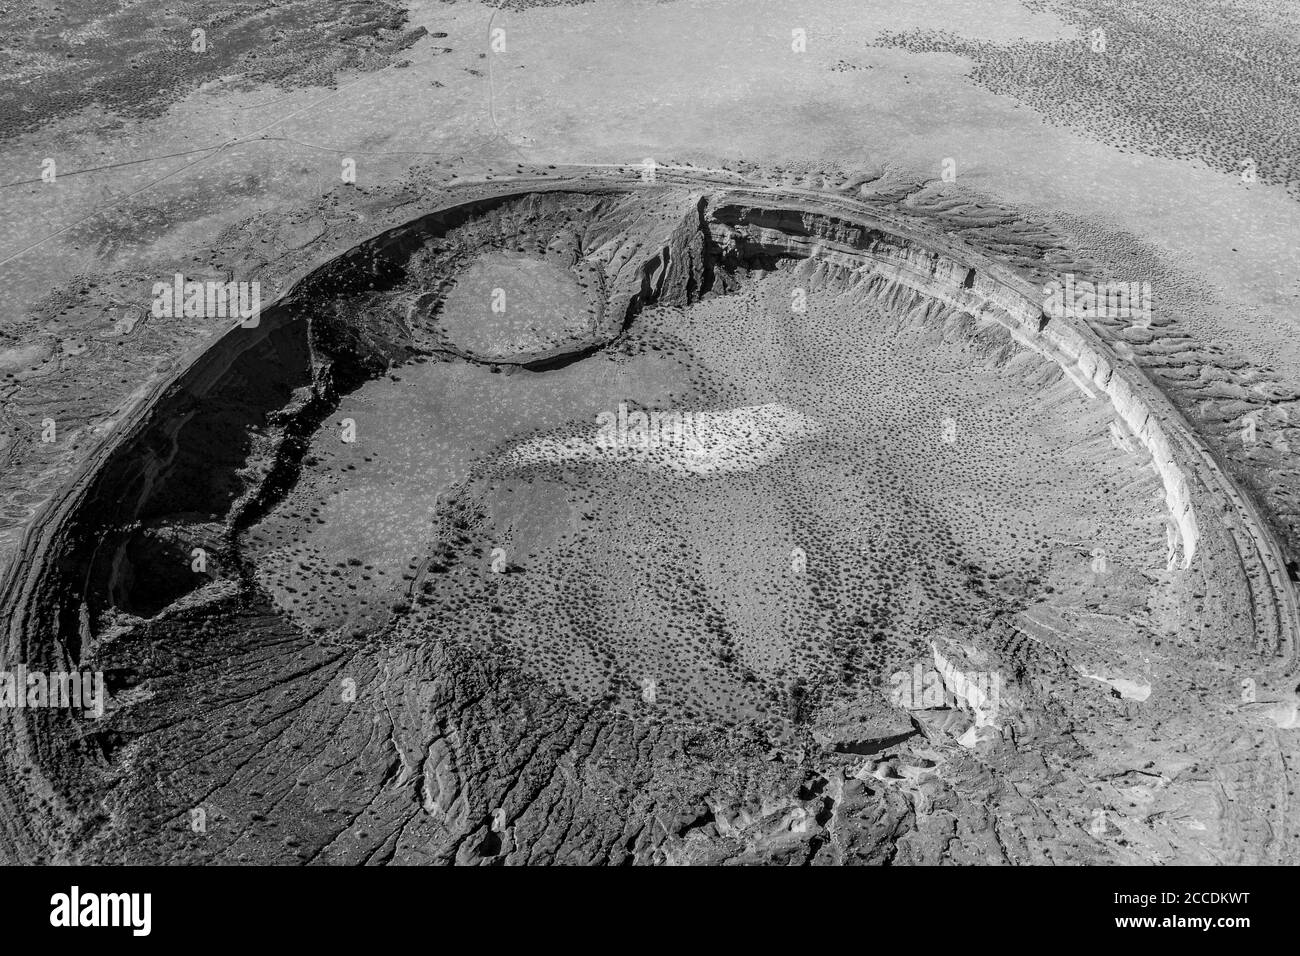 Aerial view of the maar-type volcanic crater, cater Cerro Colorado in the mountains of the El Pinacate Biosphere Reserve and the great Altar desert in Stock Photo